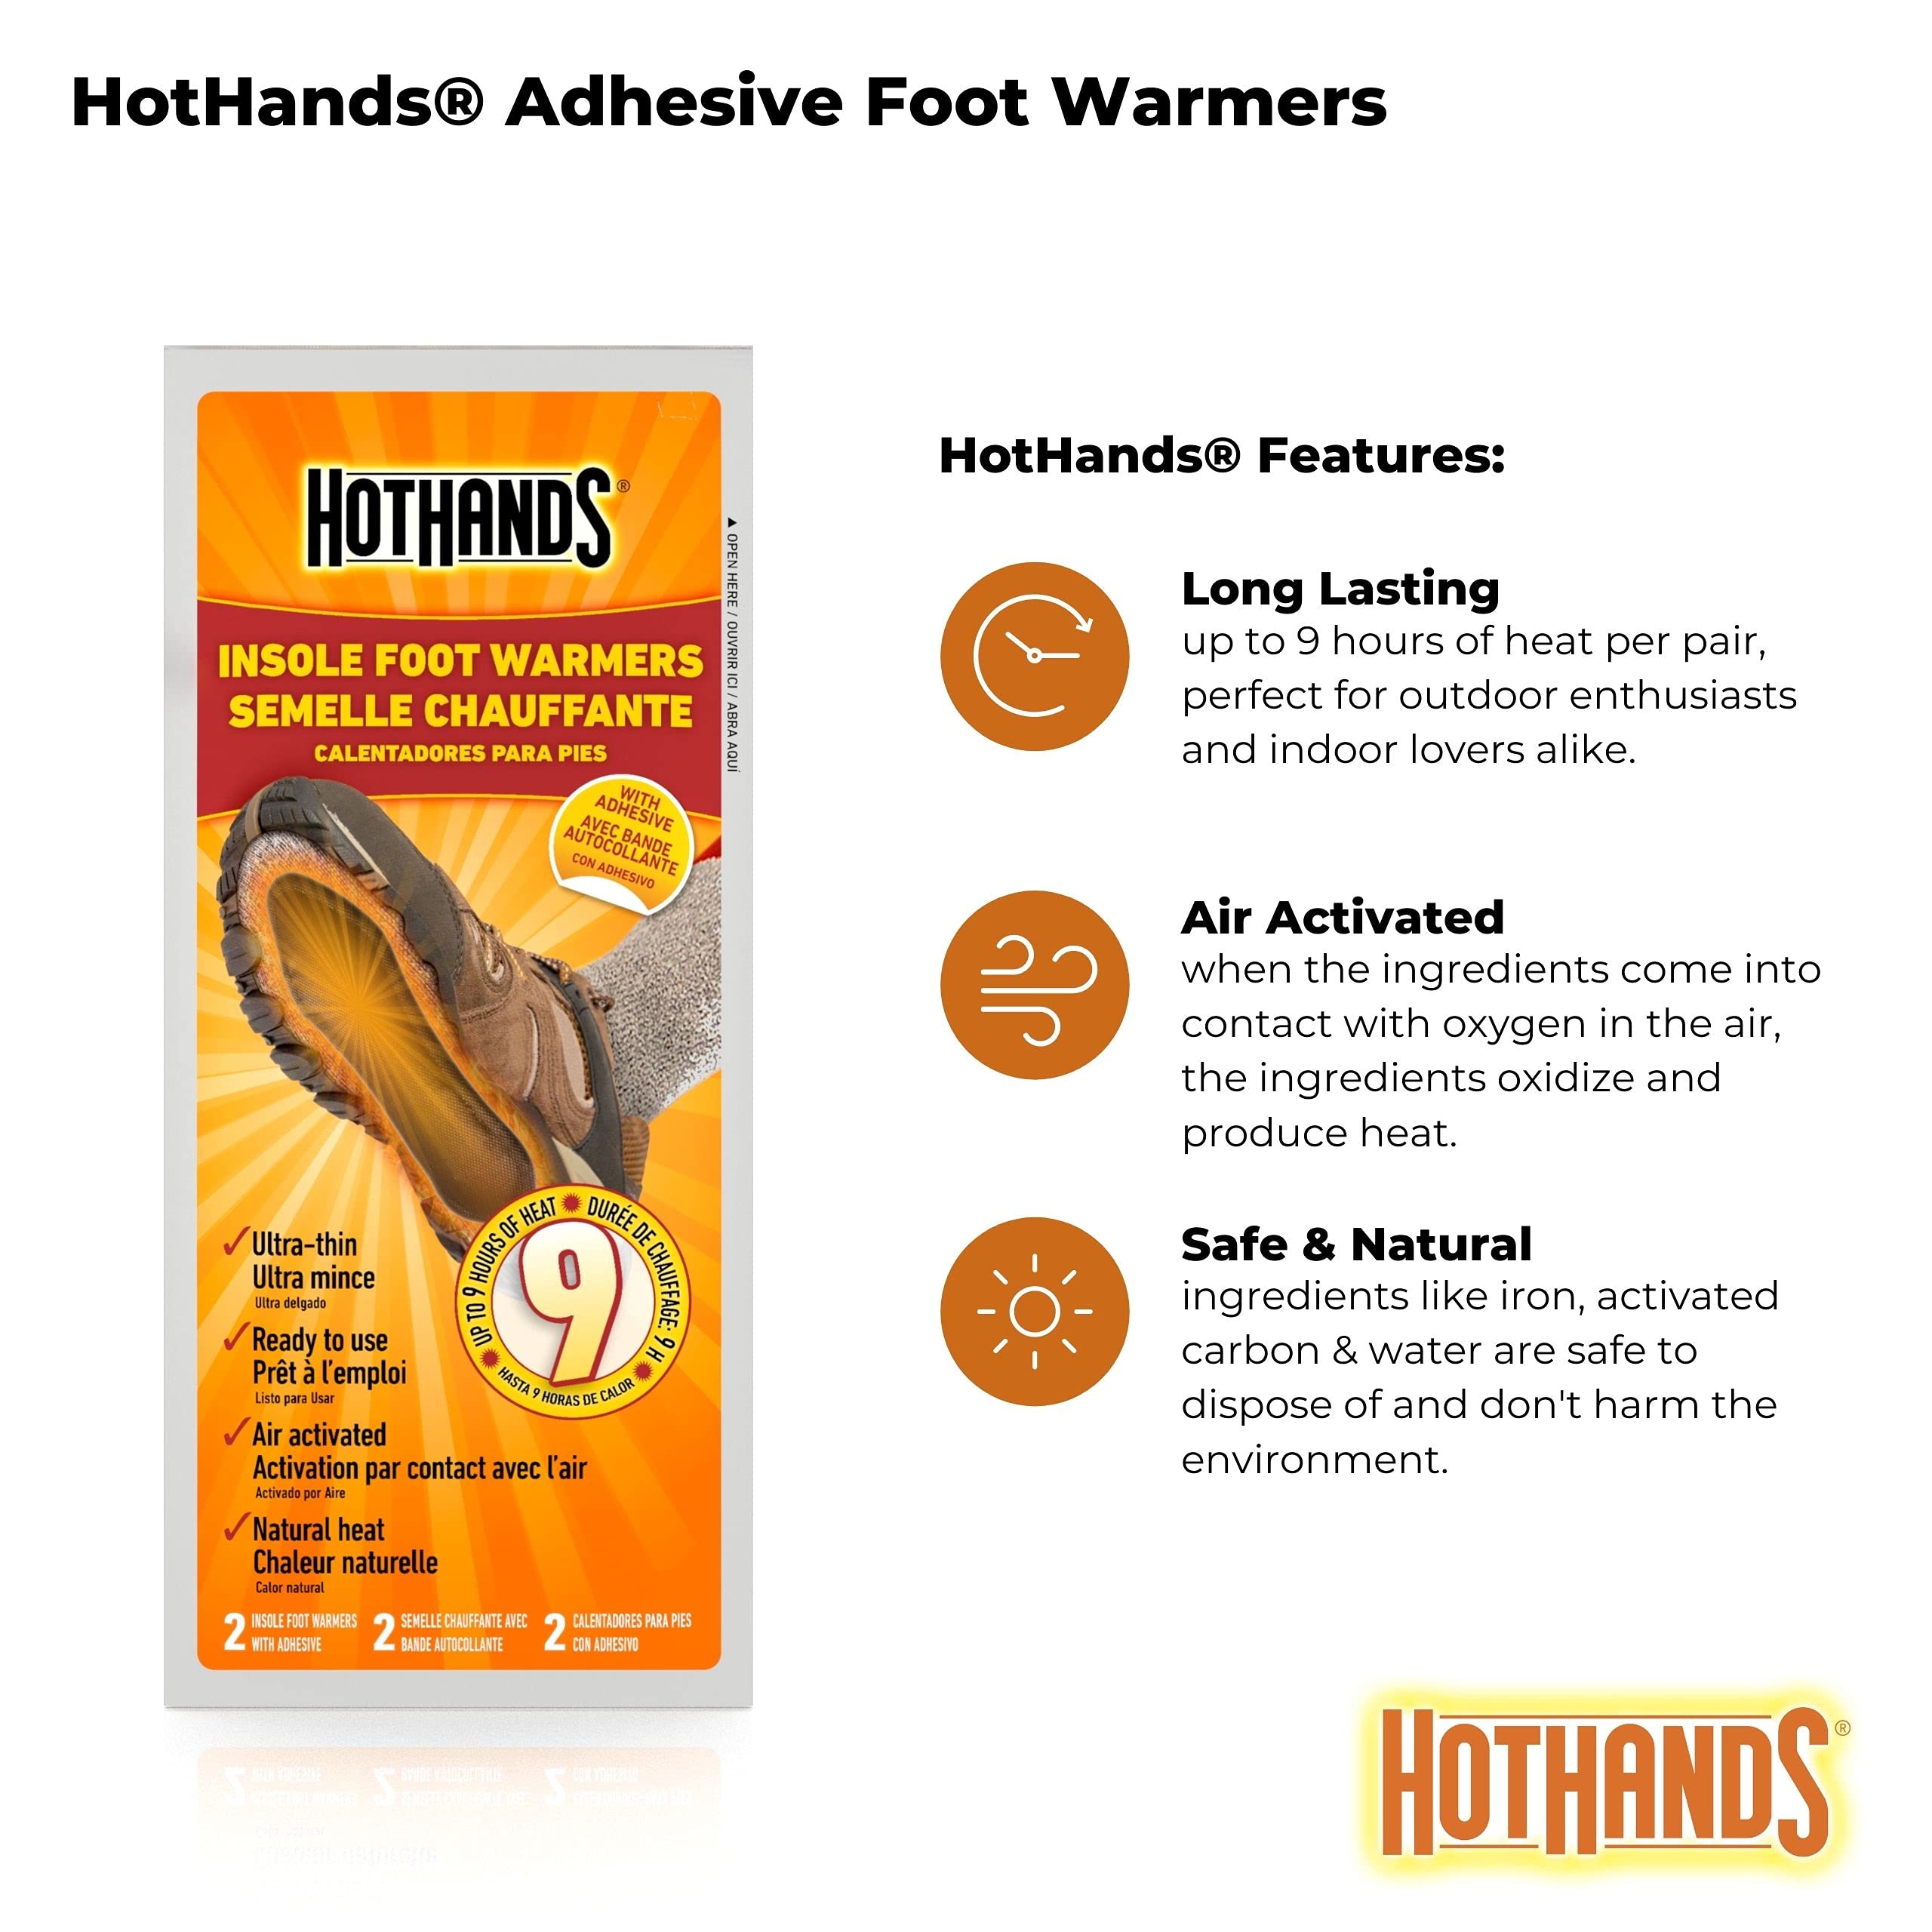 HotHands Insole Foot Warmers - Long Lasting Safe Natural Odorless Air Activated Warmers - Up to 9 Hours of Heat - 16 Pair , Black